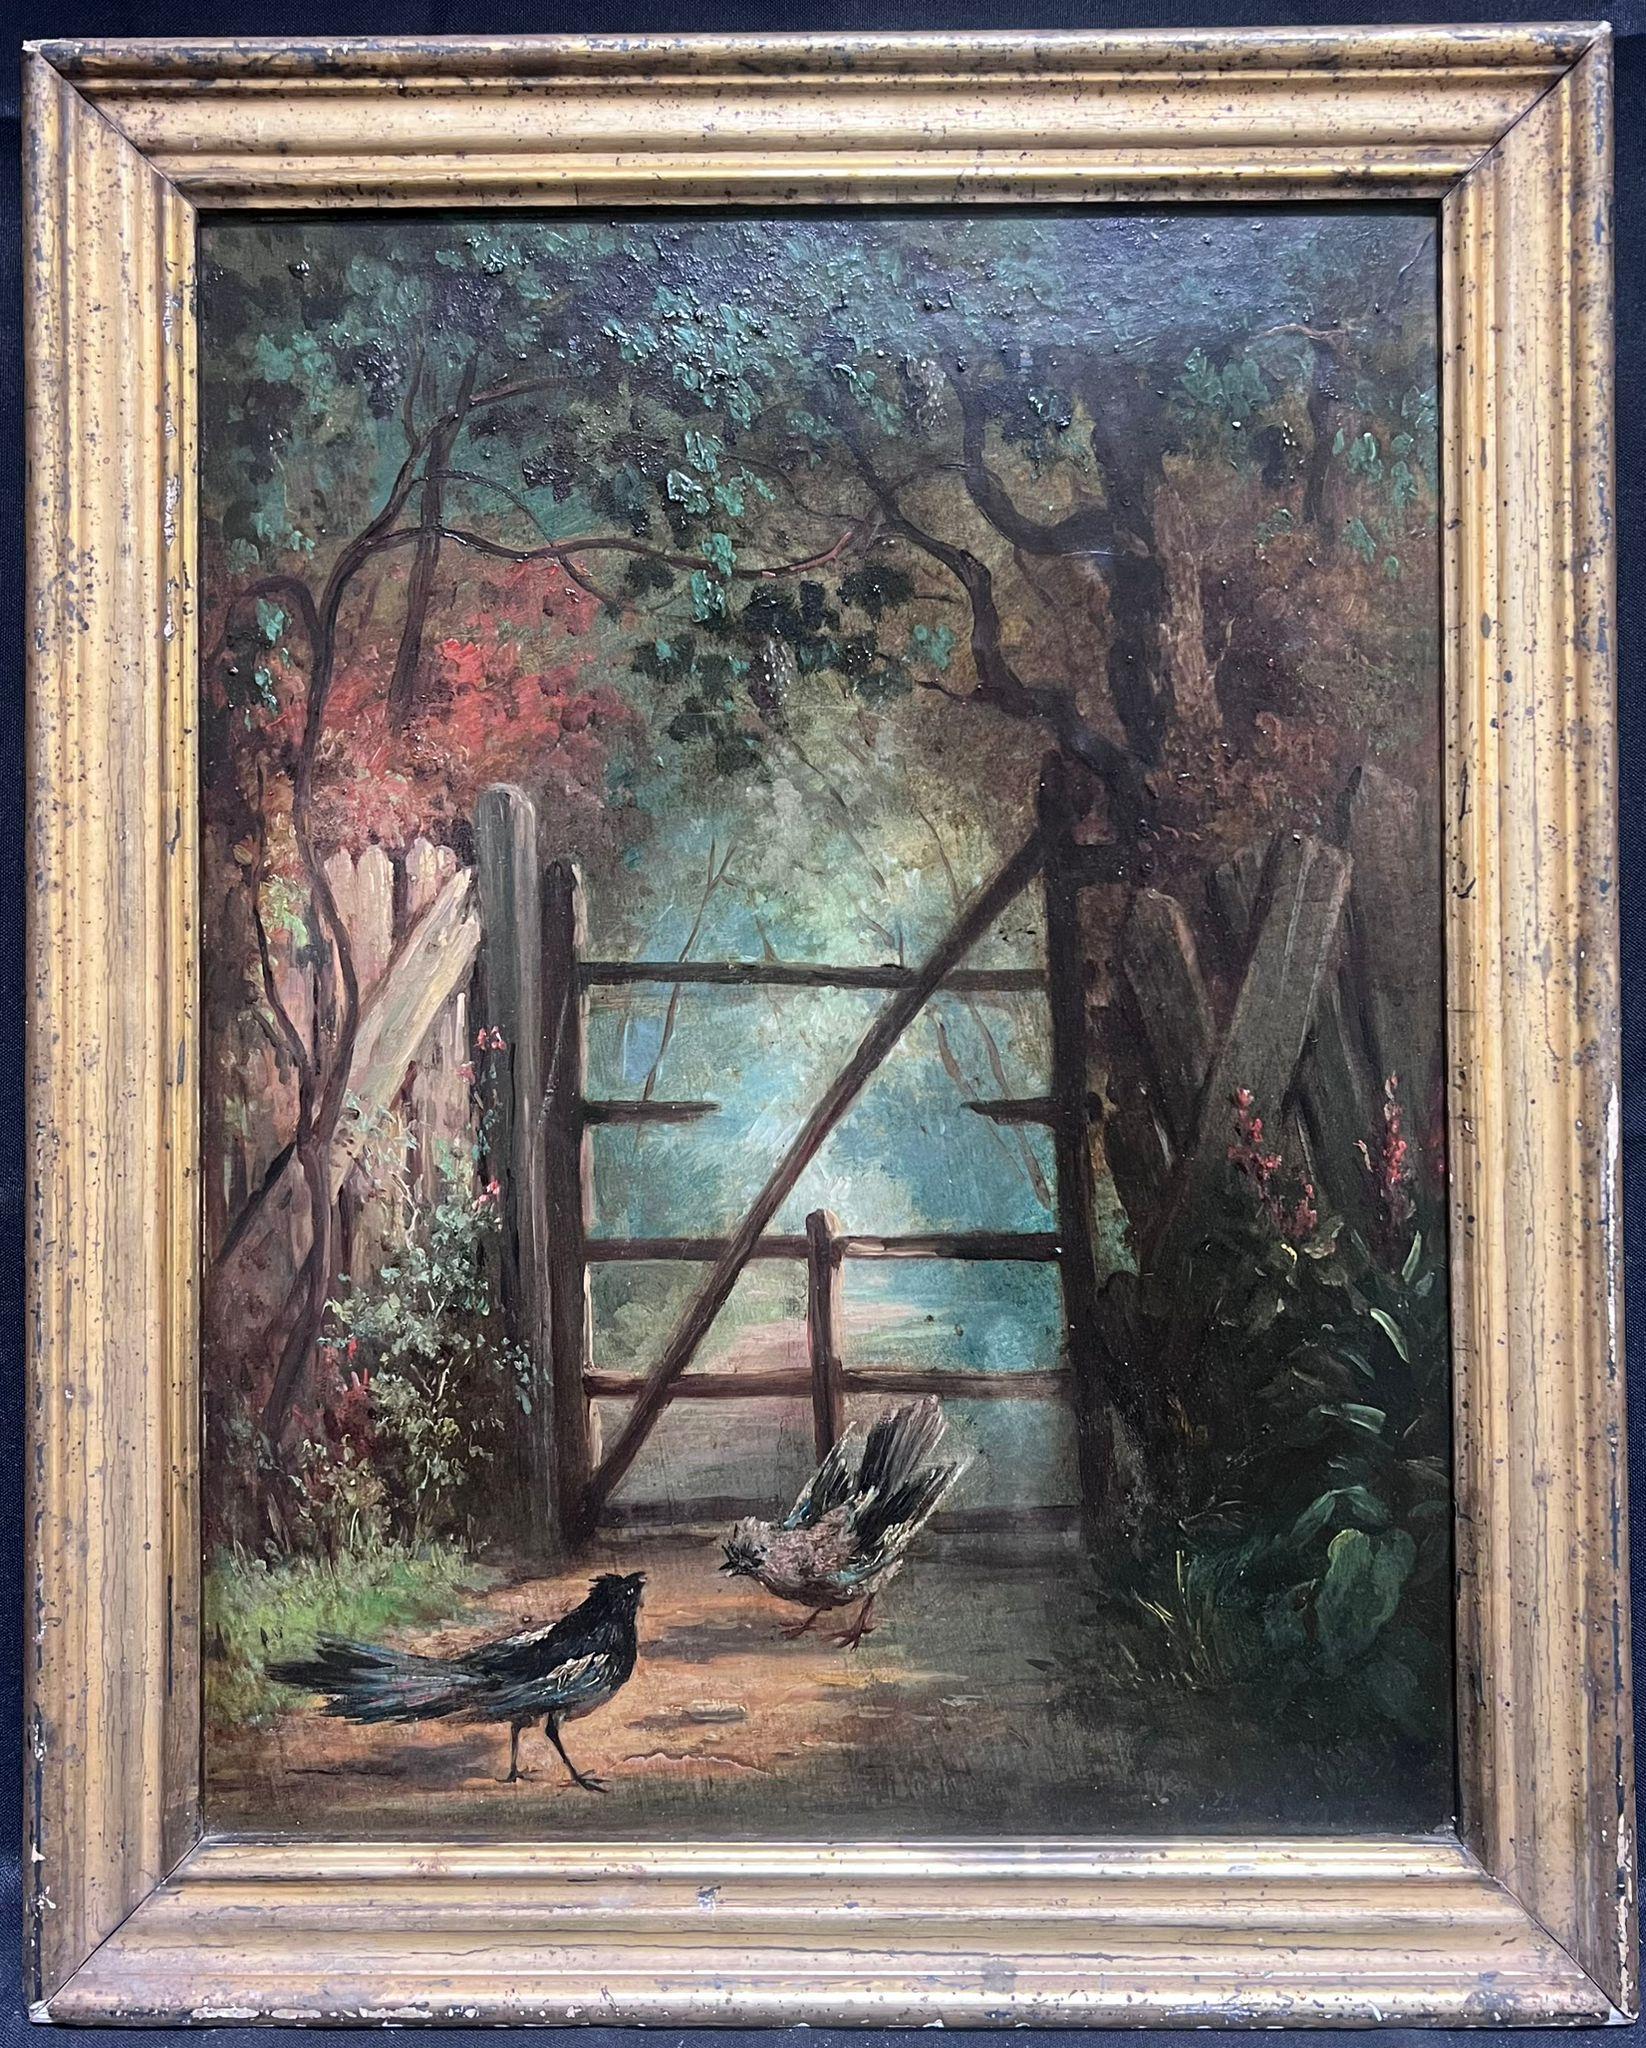 French School Landscape Painting - Antique 19th Century French Oil Painting Birds in Country Lane Wooded Landscape